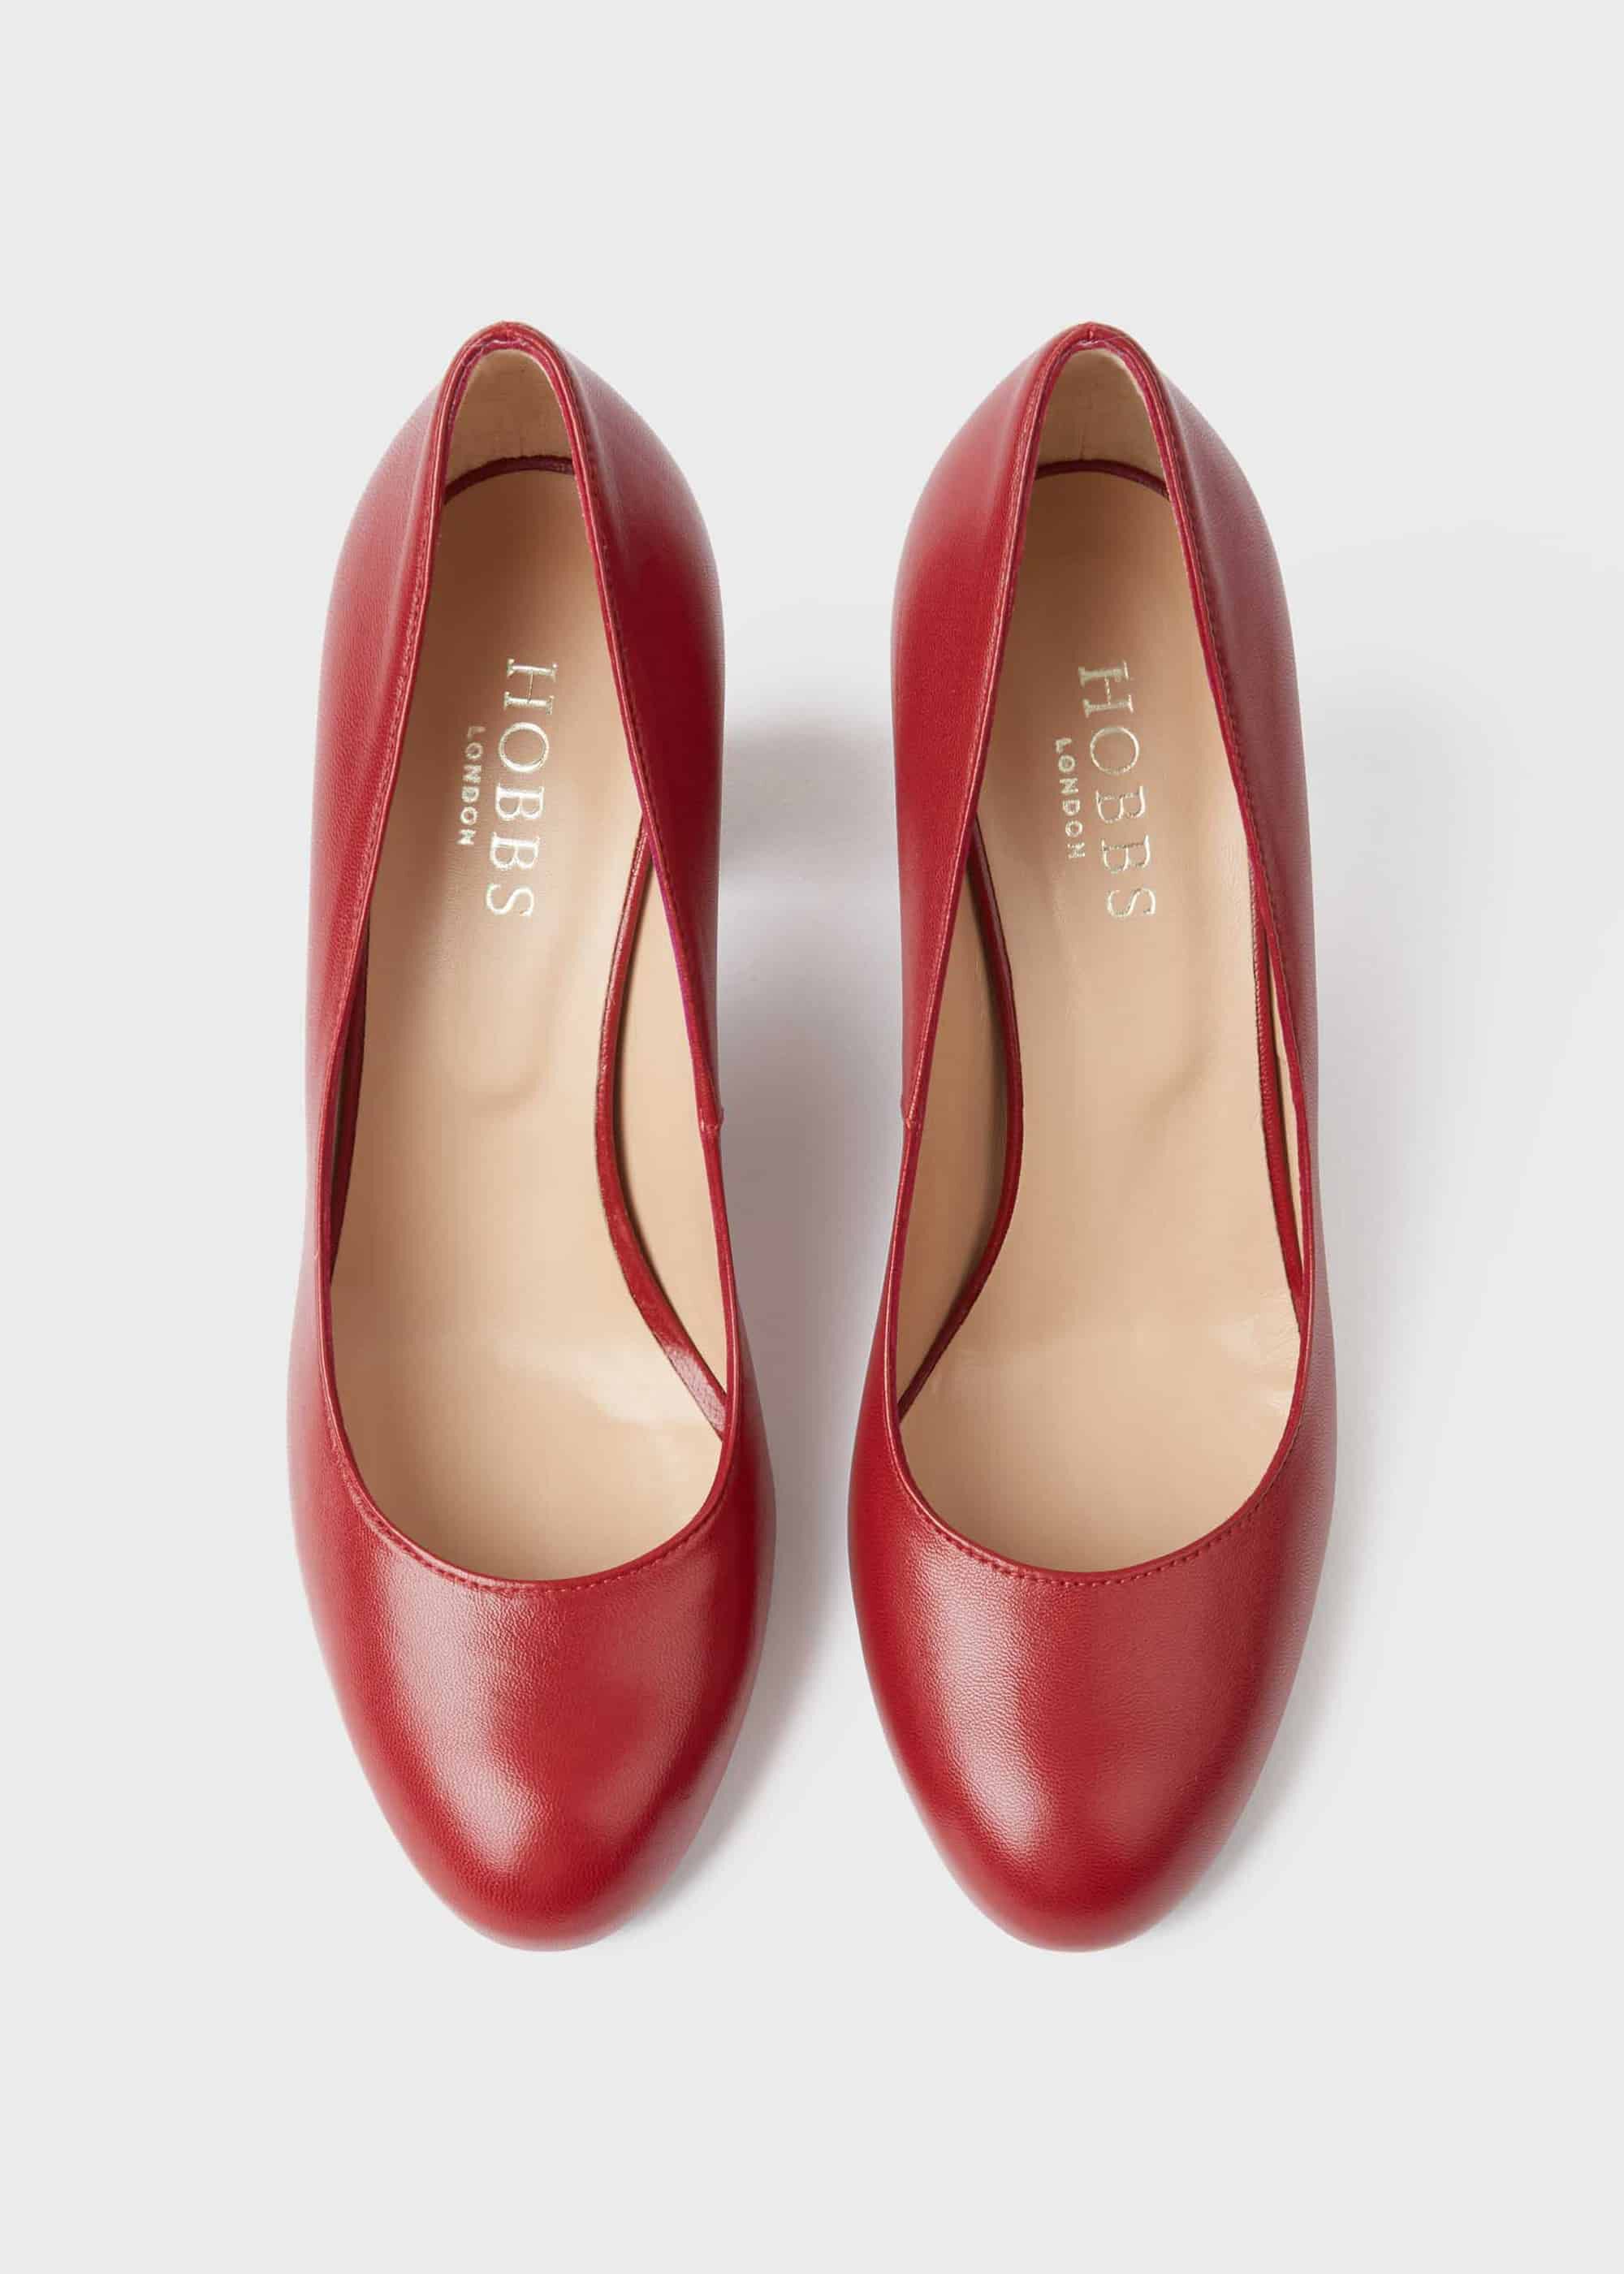 red leather court shoes